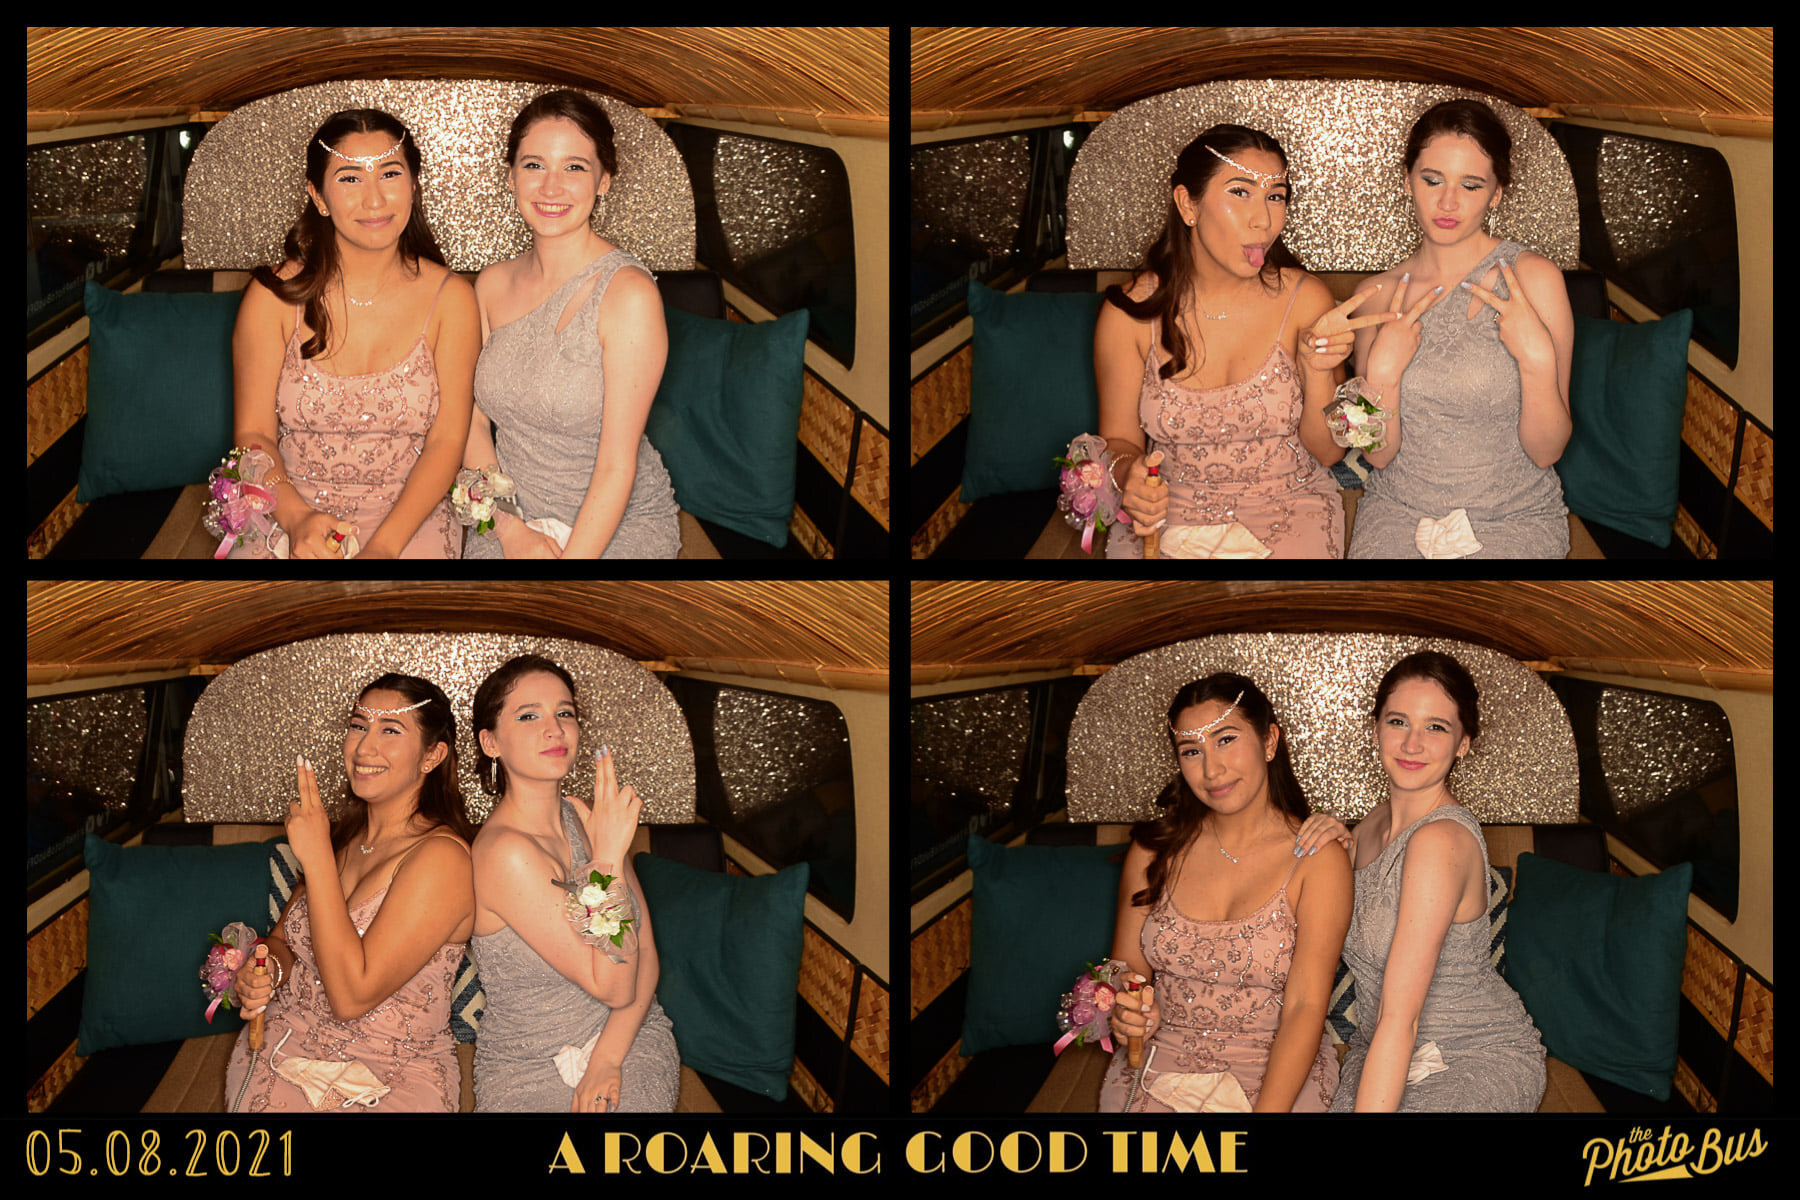 High School Prom photo booth